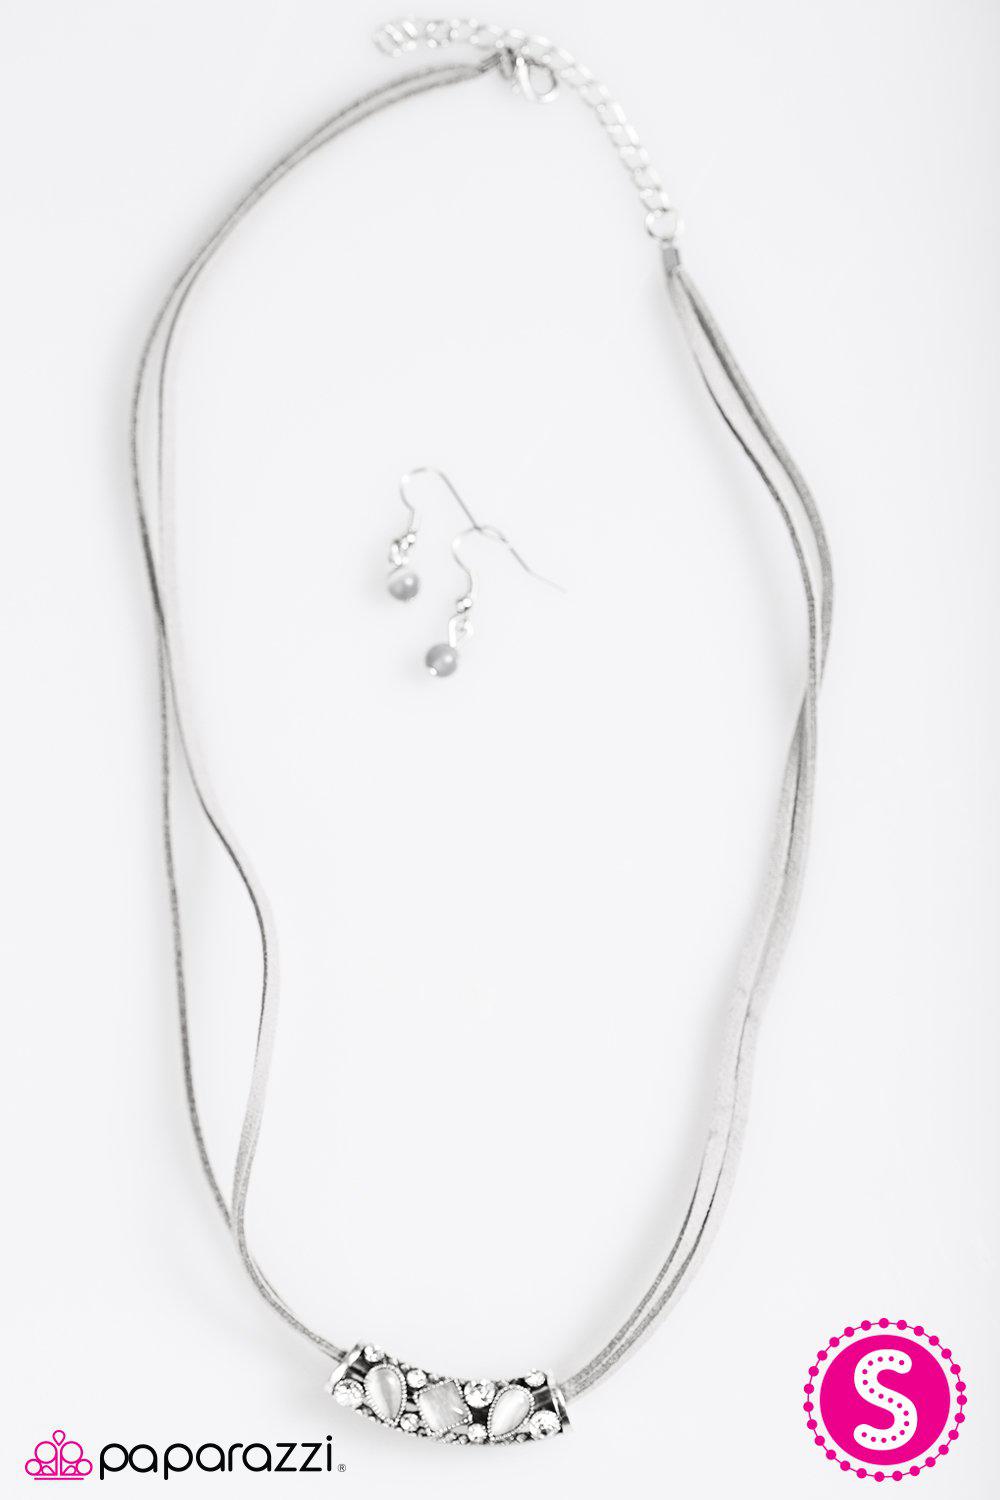 Galaxy Glam Silver Moonstone Necklace and matching Earrings - Paparazzi Accessories-CarasShop.com - $5 Jewelry by Cara Jewels